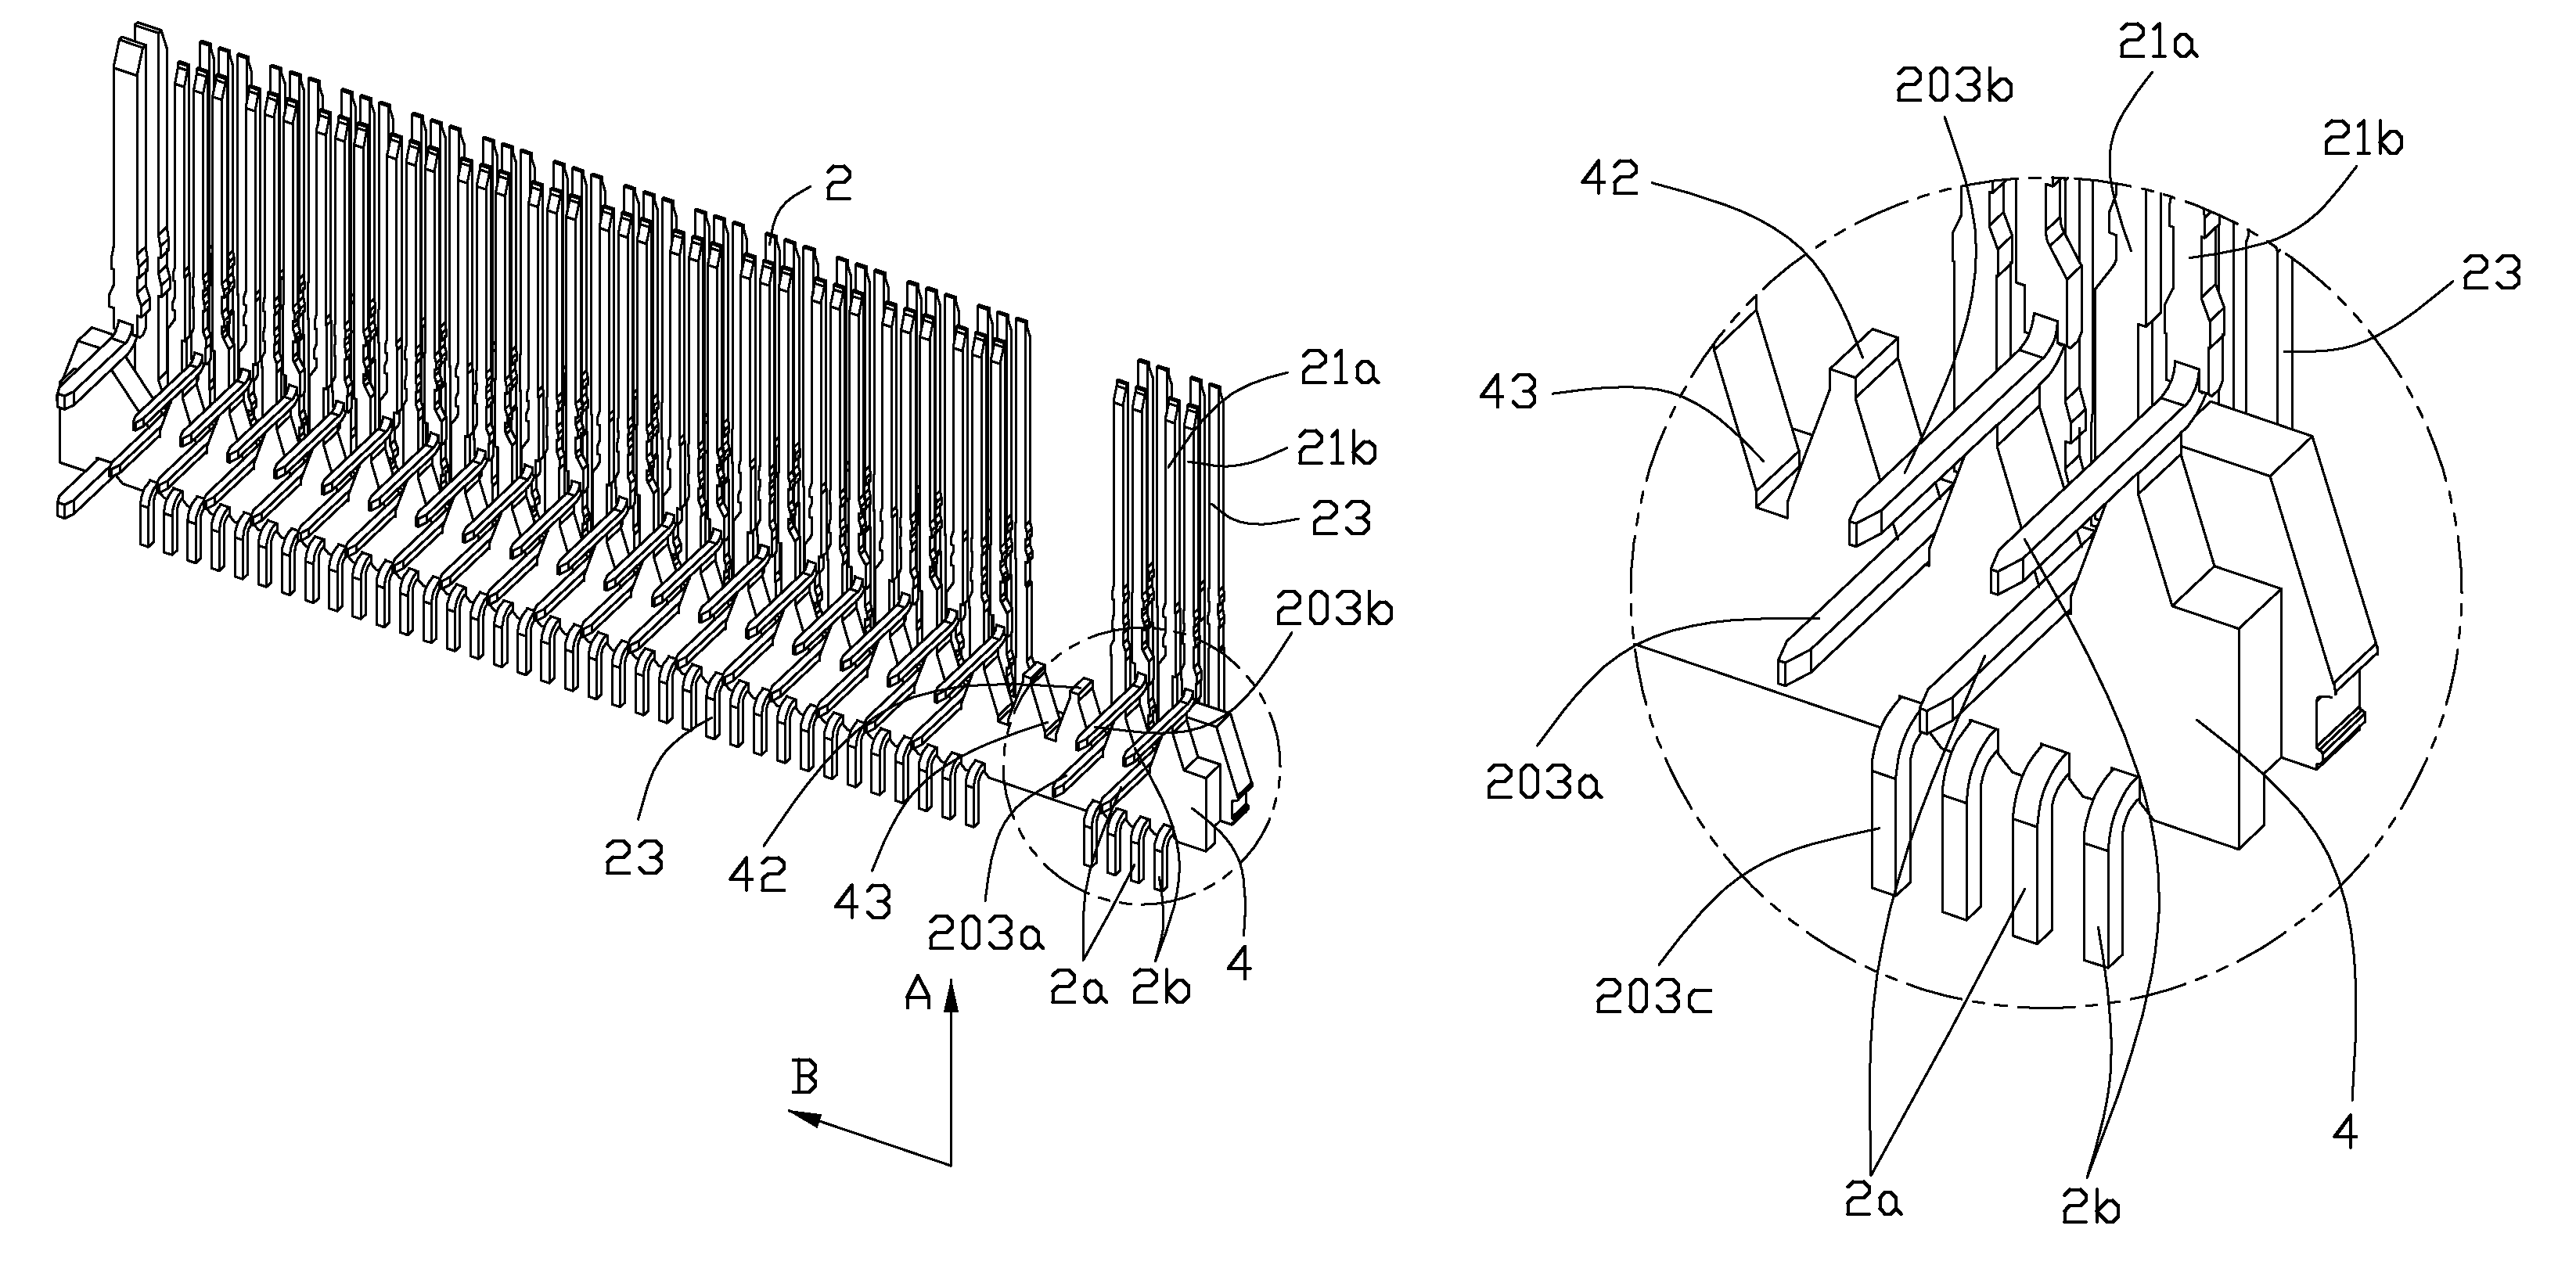 Electrical connector having high density contacts for miniaturization